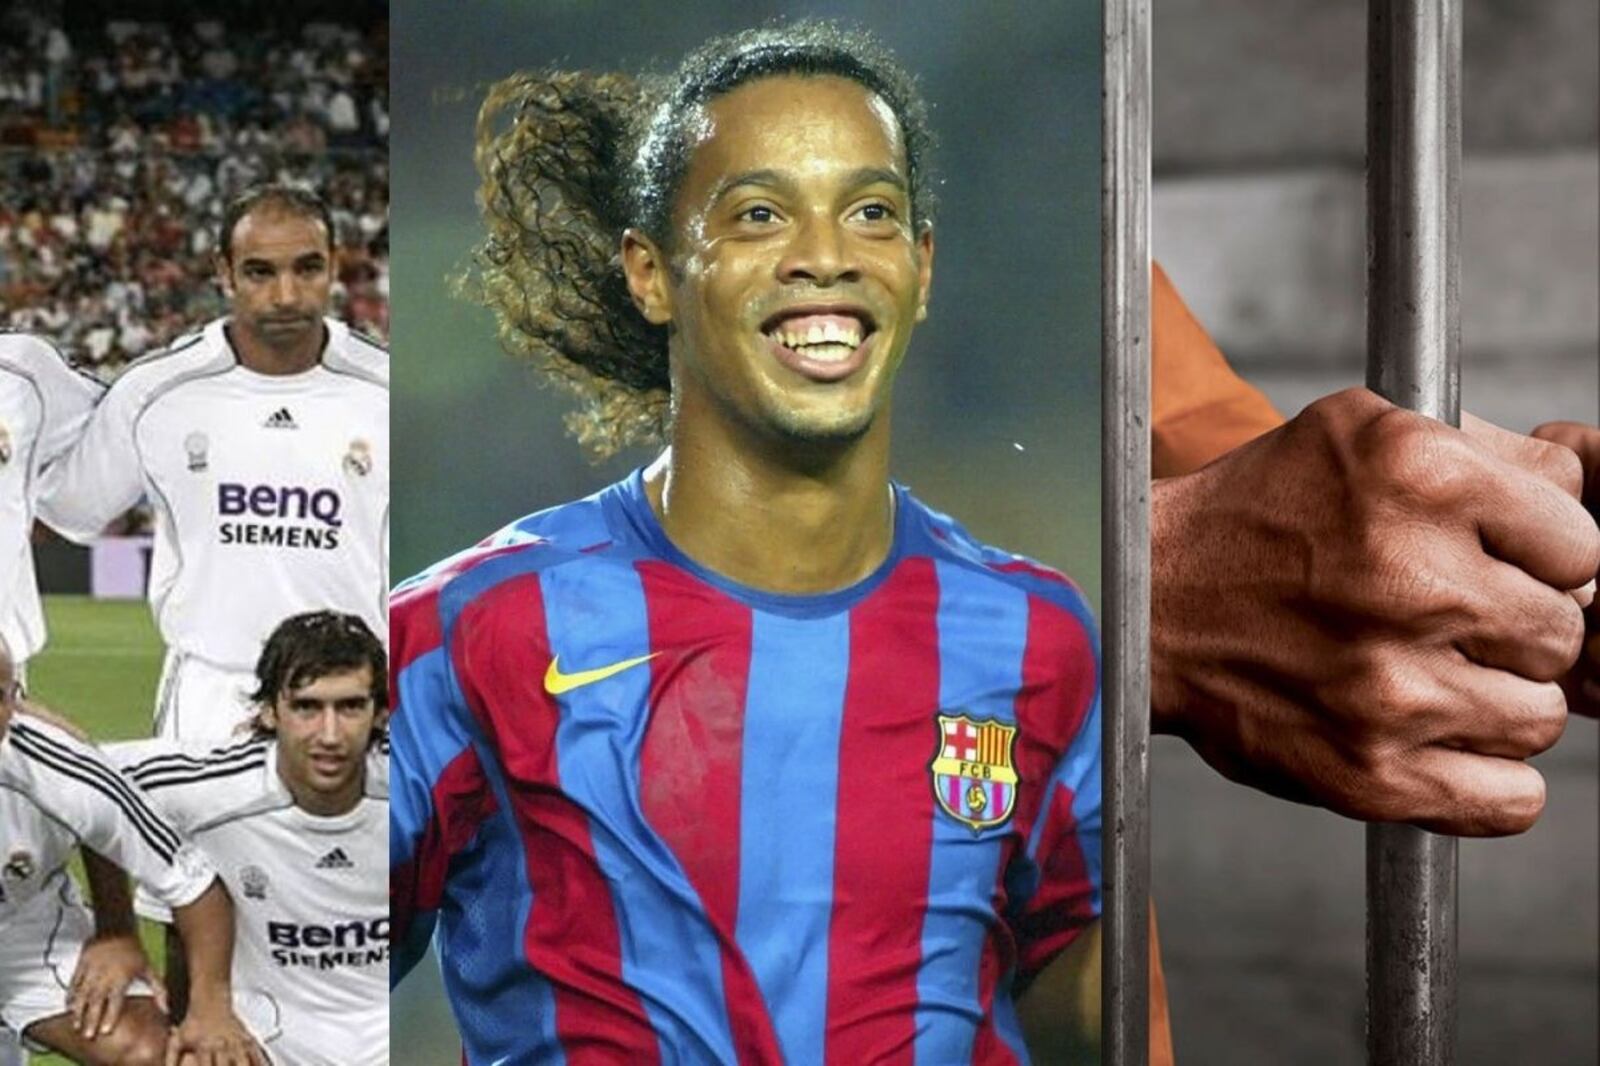 He was a idol of Real Madrid, was better than Ronaldinho, now he can get behind bars